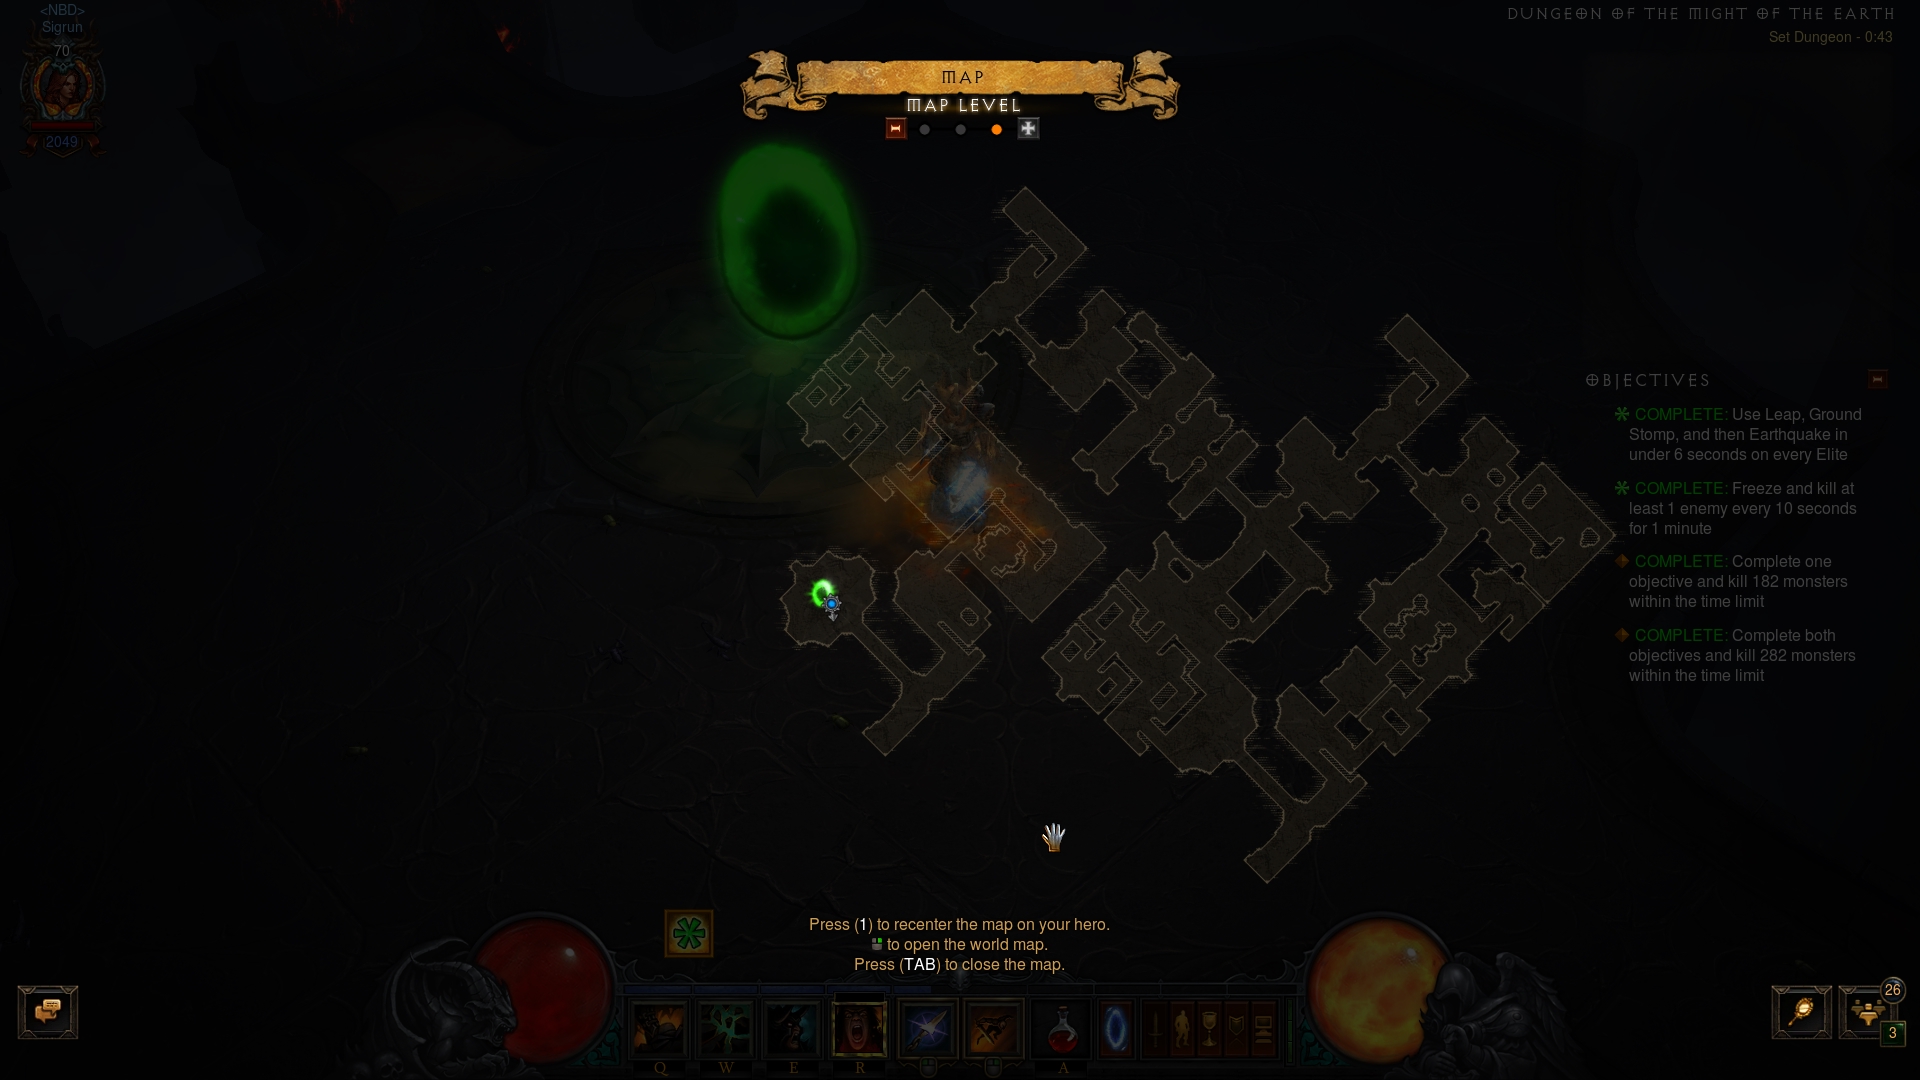 Layout of MotE set dungeon